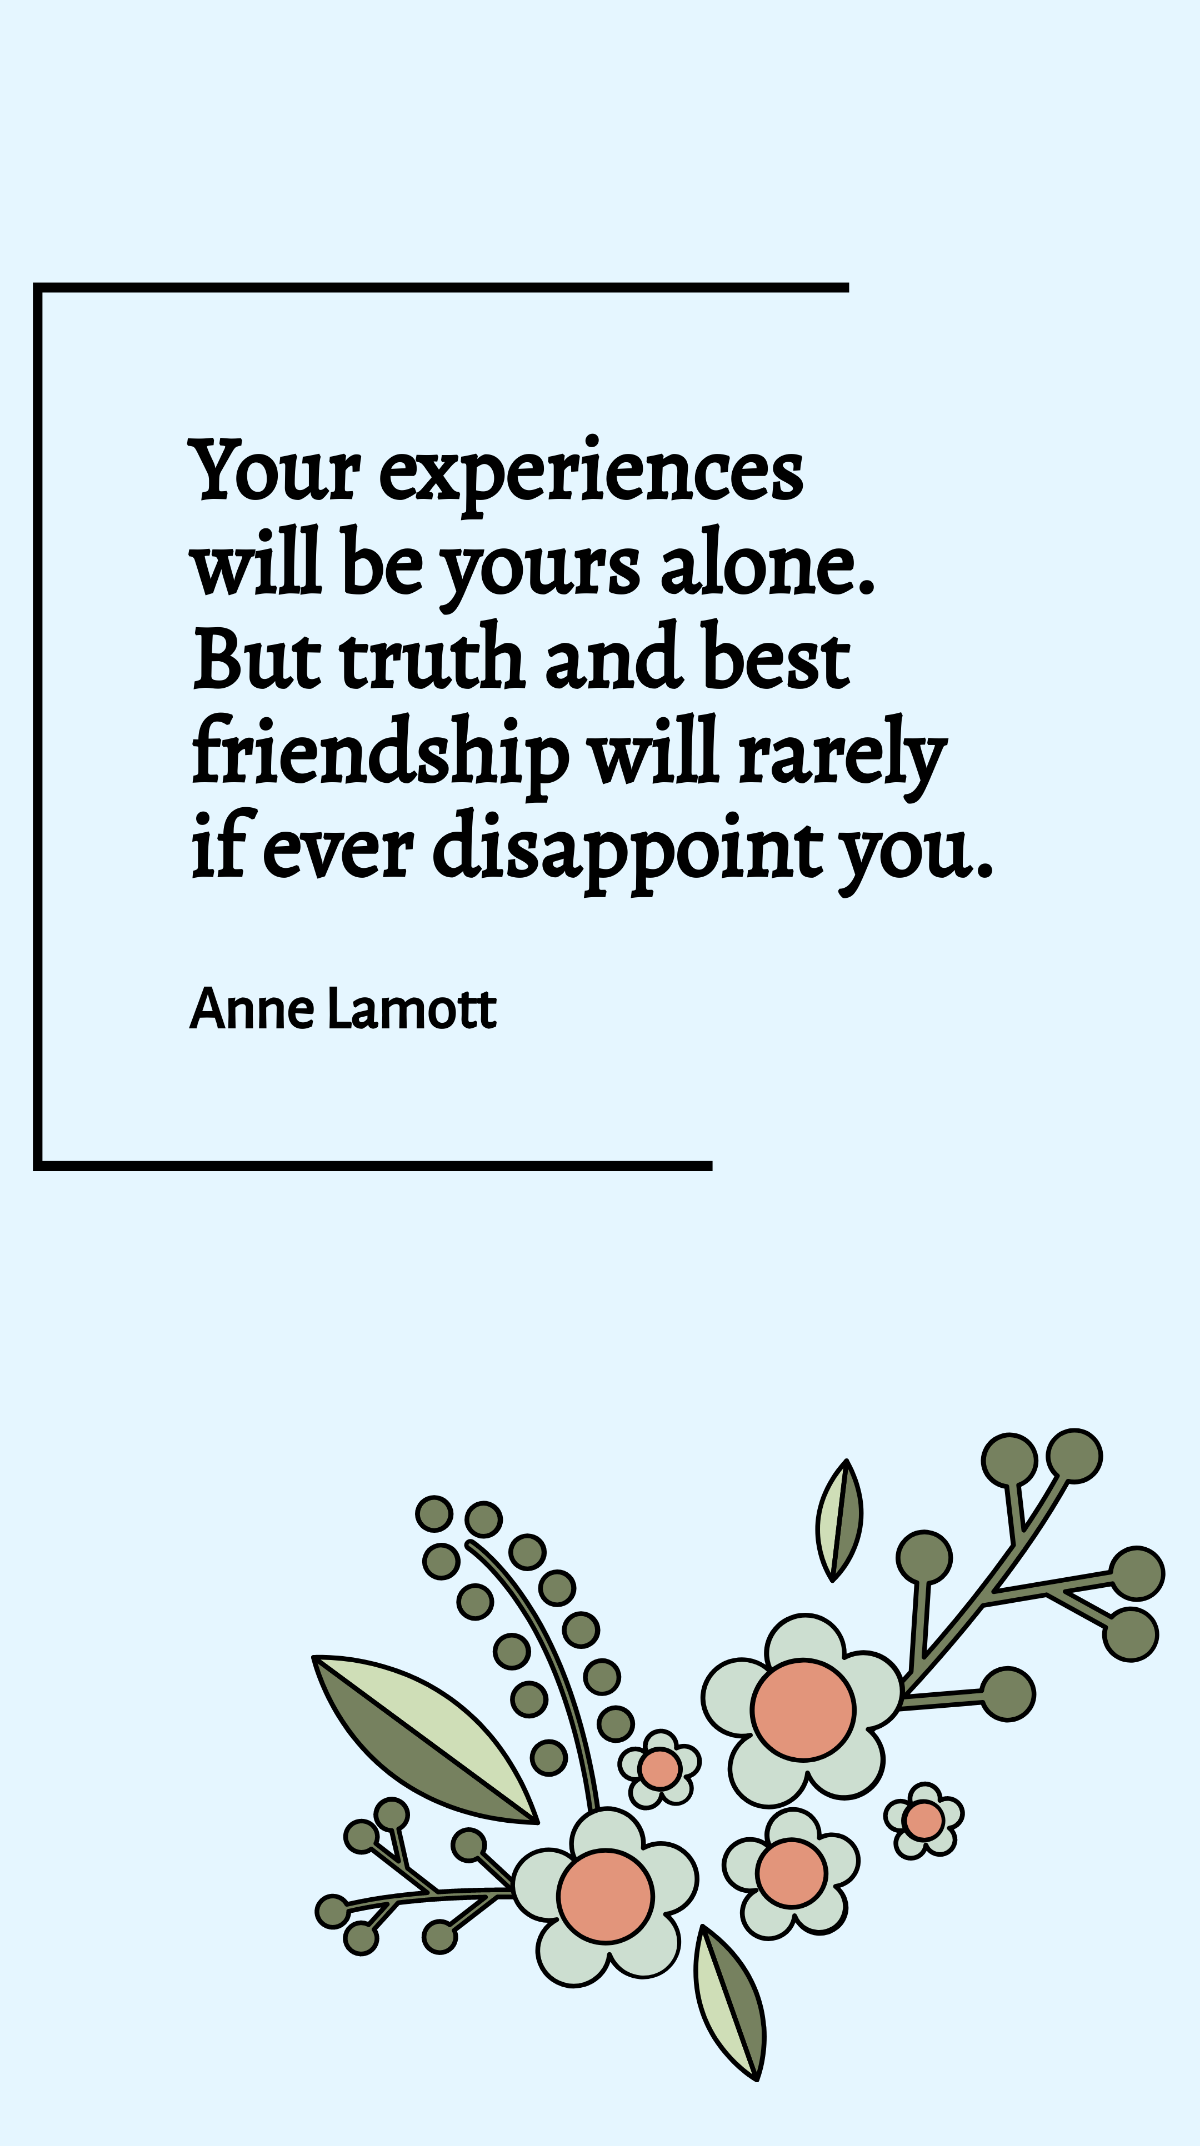 Anne Lamott - Your experiences will be yours alone. But truth and best friendship will rarely if ever disappoint you. Template